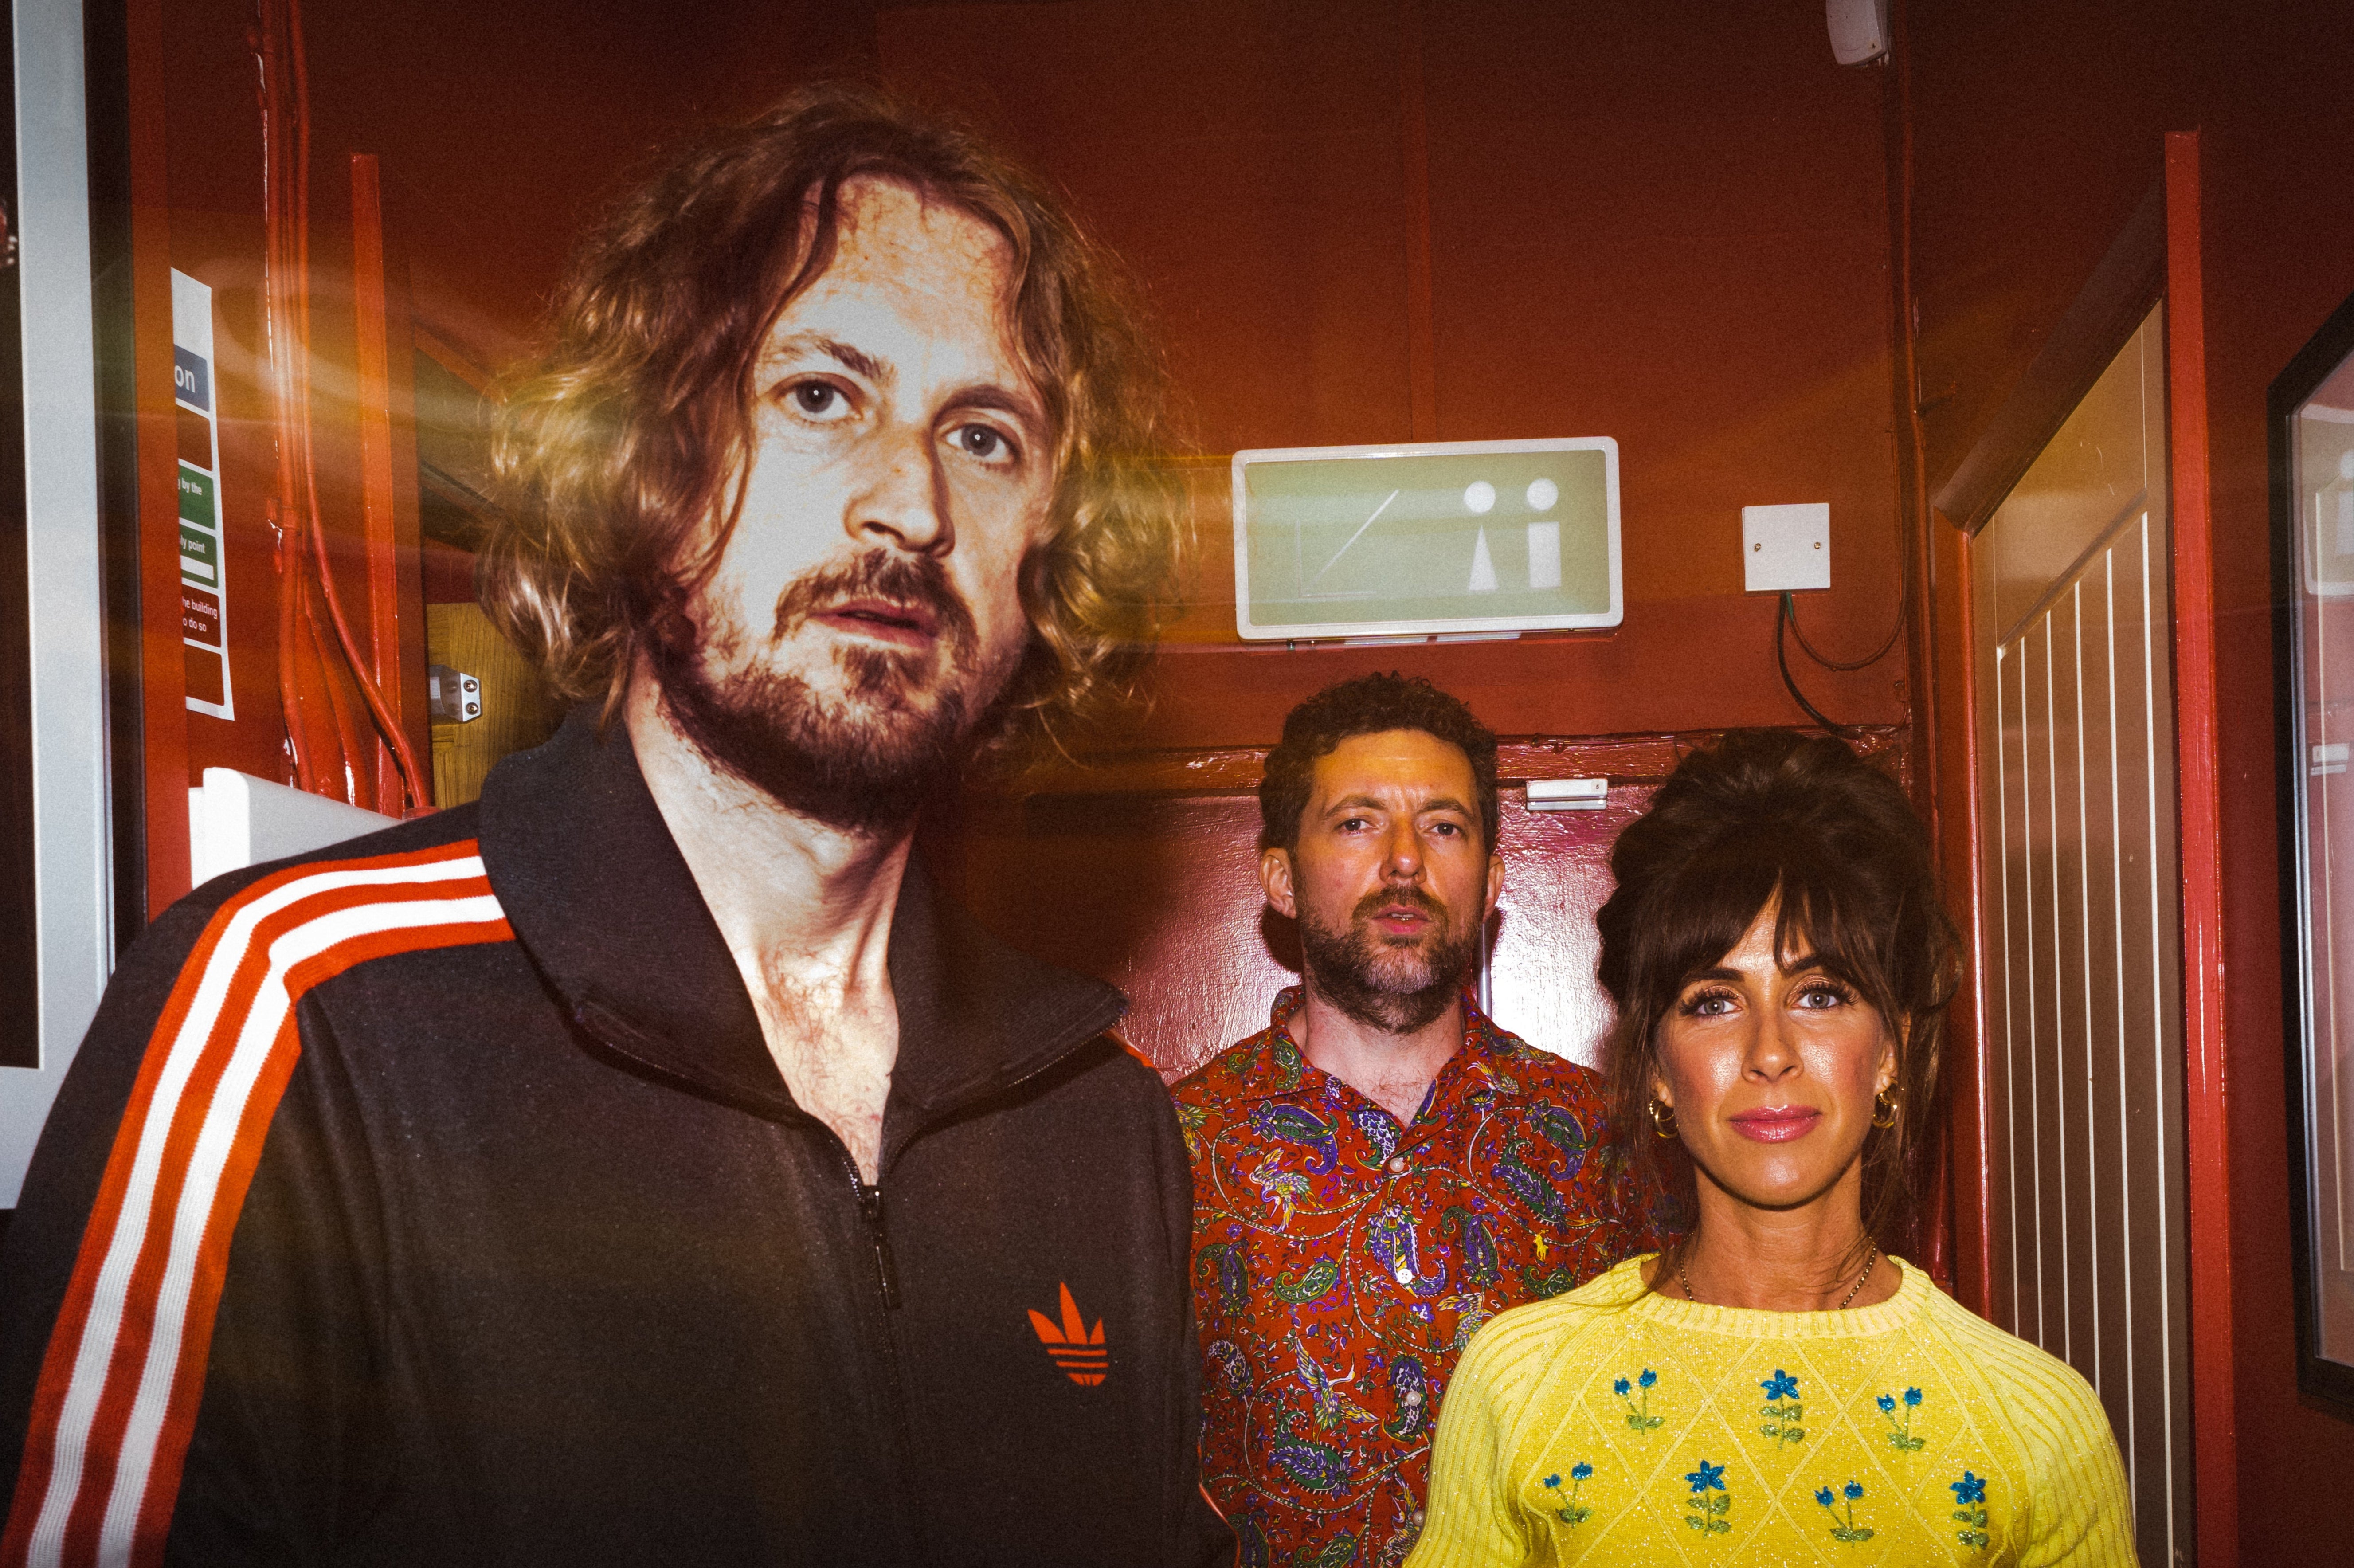 ‘The next thing I hear, Amy’s covering our song:’ The Zutons reflect on Winehouse’s ‘Valerie’ cover ahead of their new album